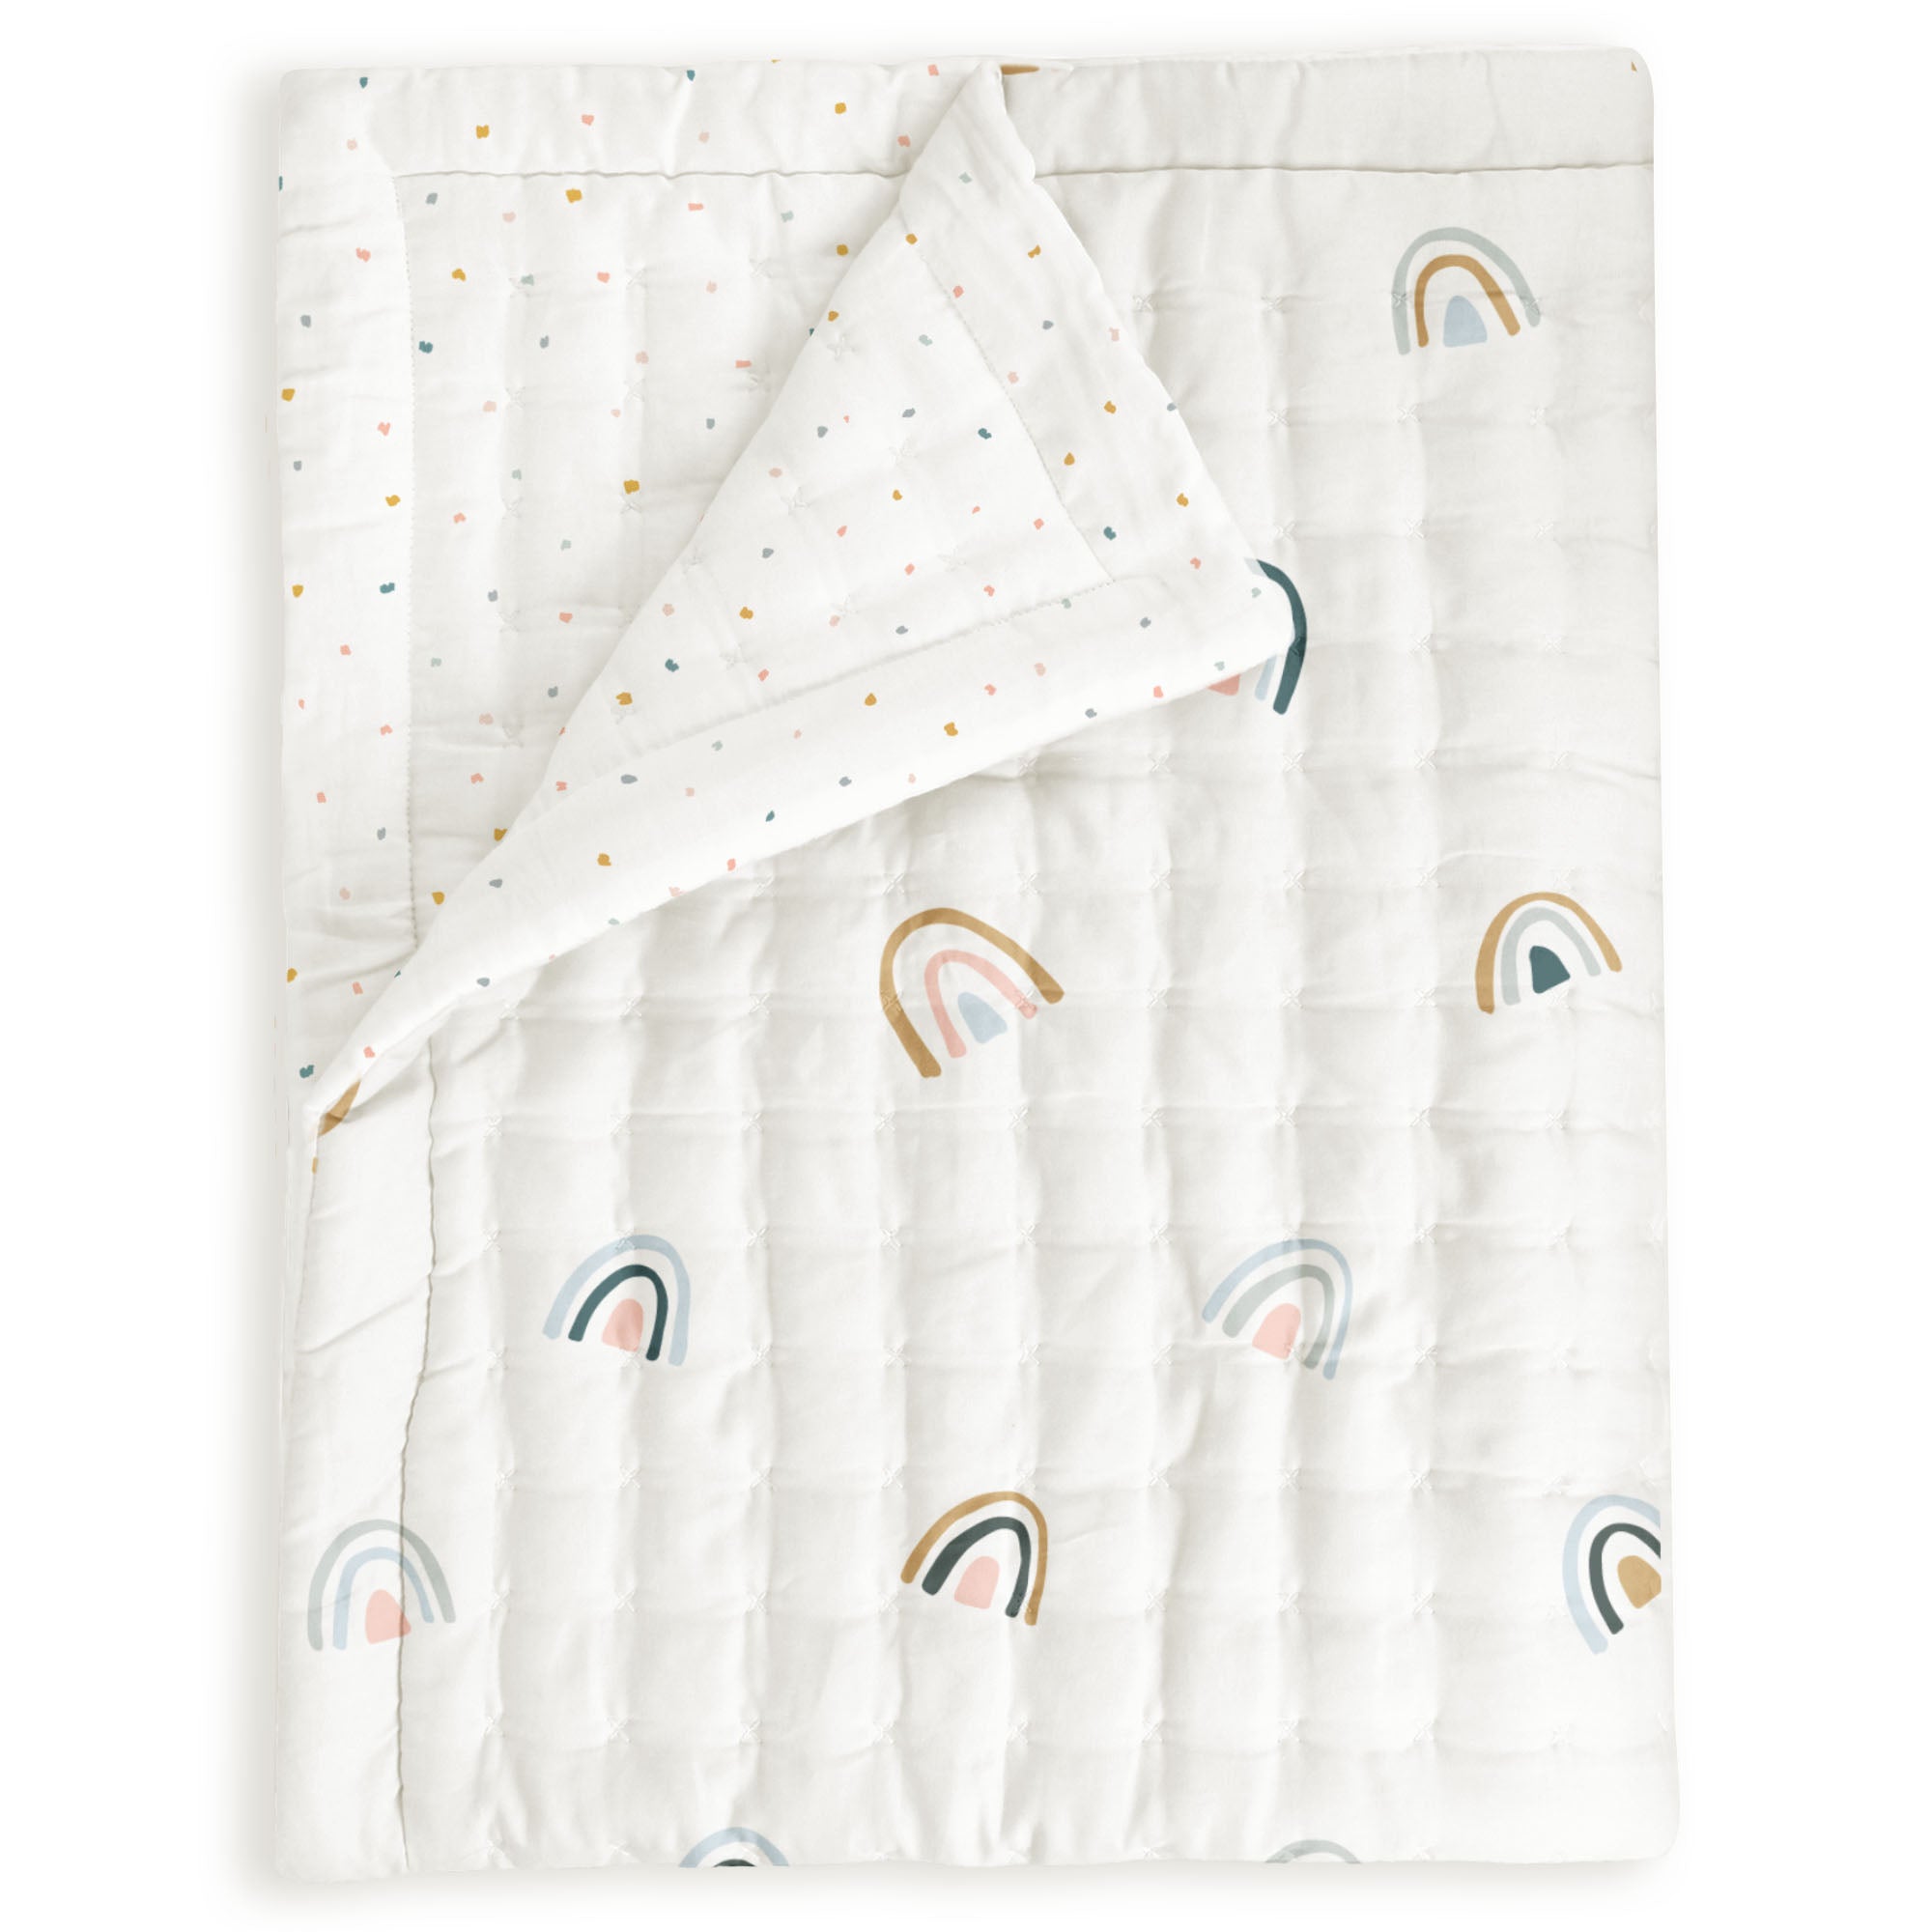 A cozy Organic Cotton Comforter - Dotty & Rainbow from Makemake Organics with a pattern of colorful rainbows and scattered multicolored dots, partially folded to reveal a white underside.